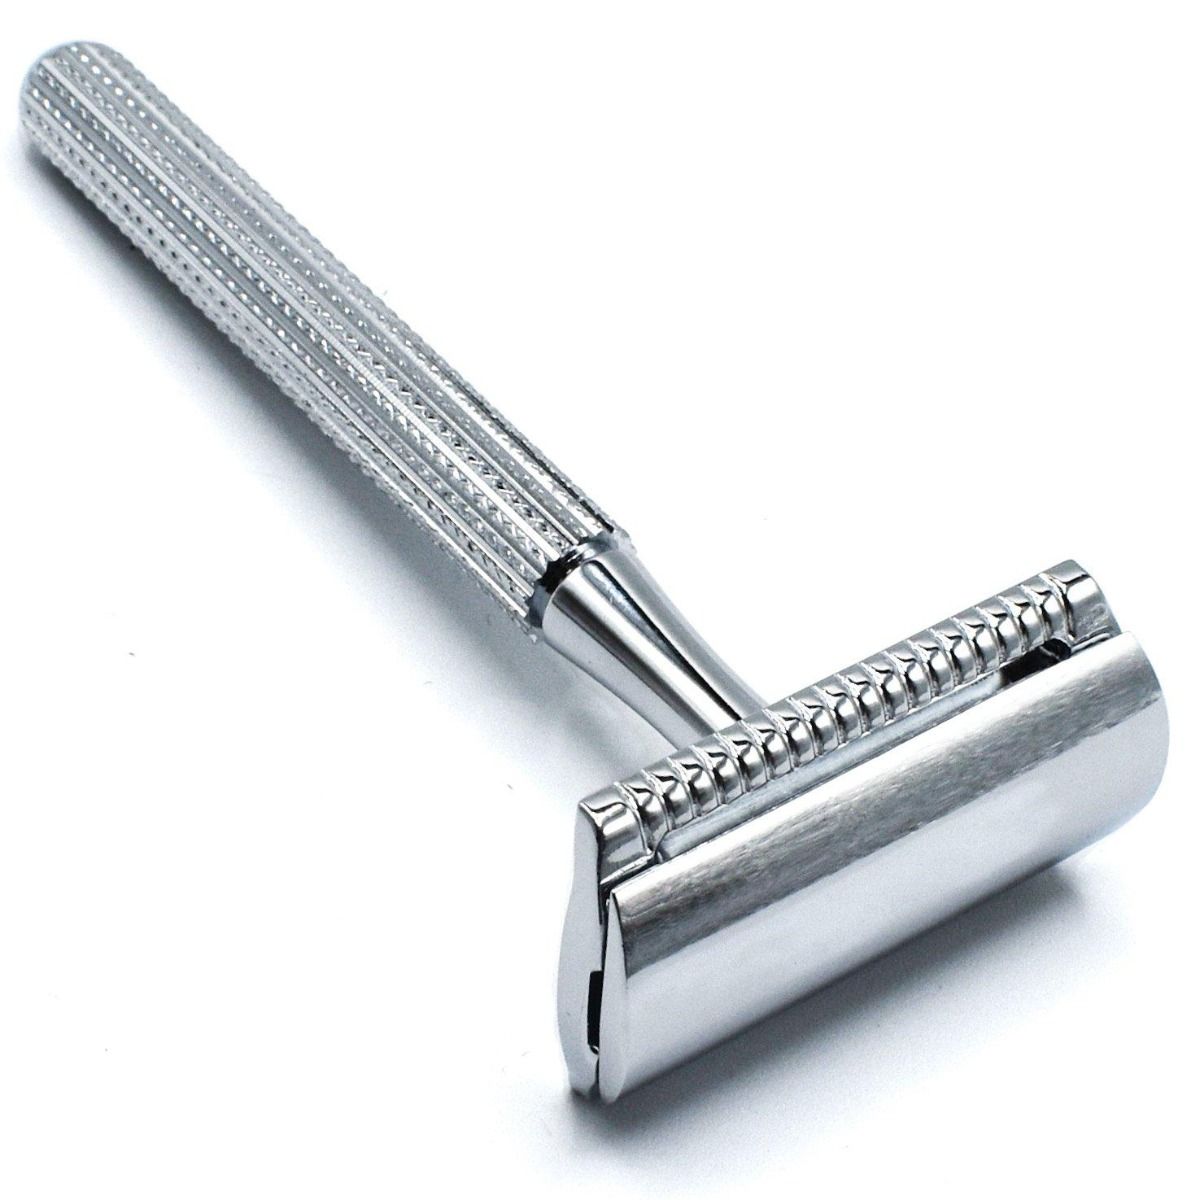 Parker Unisex Textured Long Handle Three piece Safety Razor with new Parker head